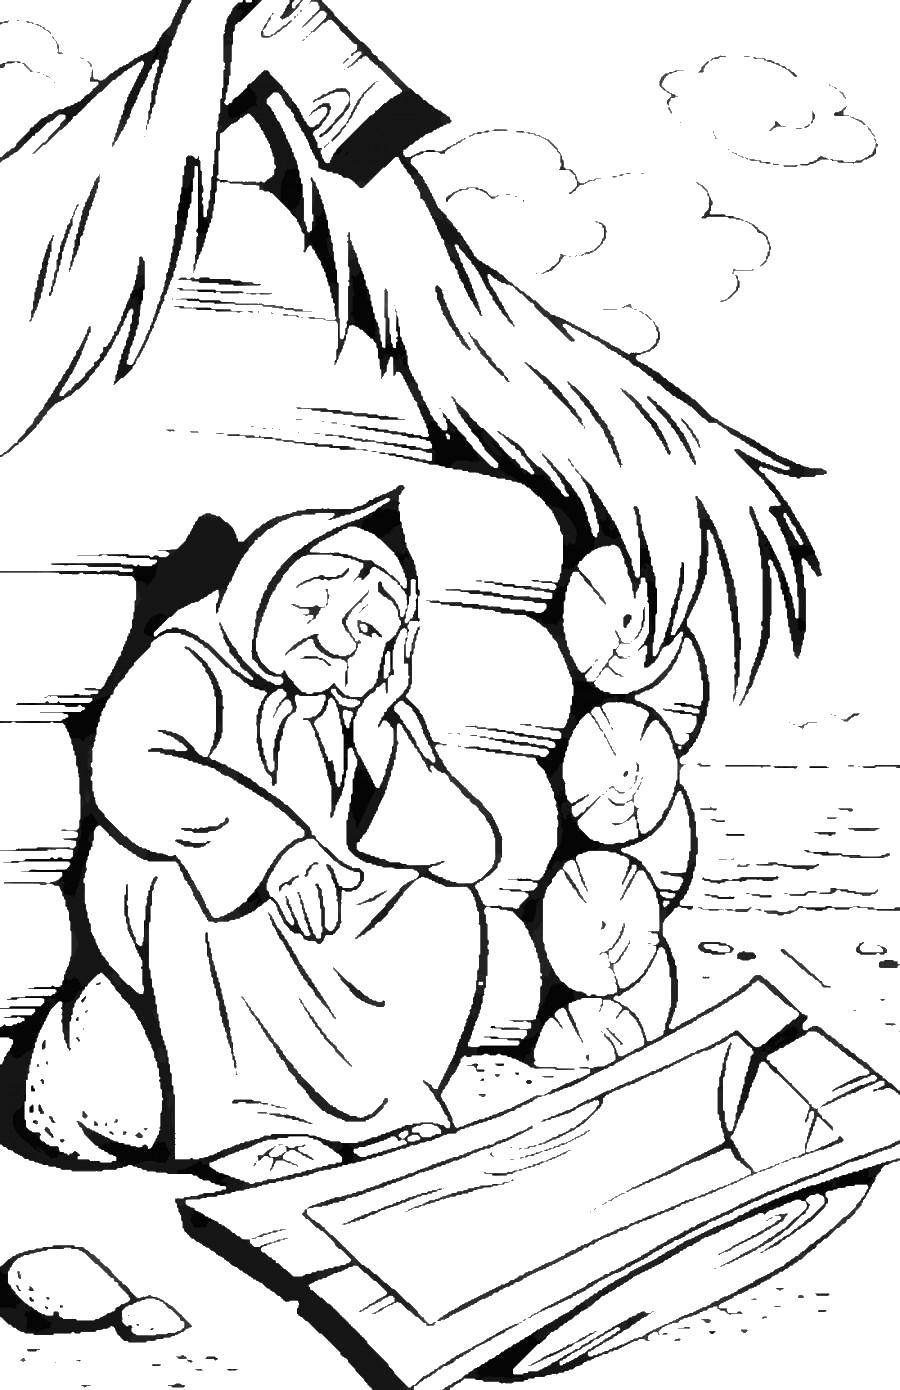 Coloring The old woman at the broken trough. Category that old woman. Tags:  old woman, Granny, fish, old.